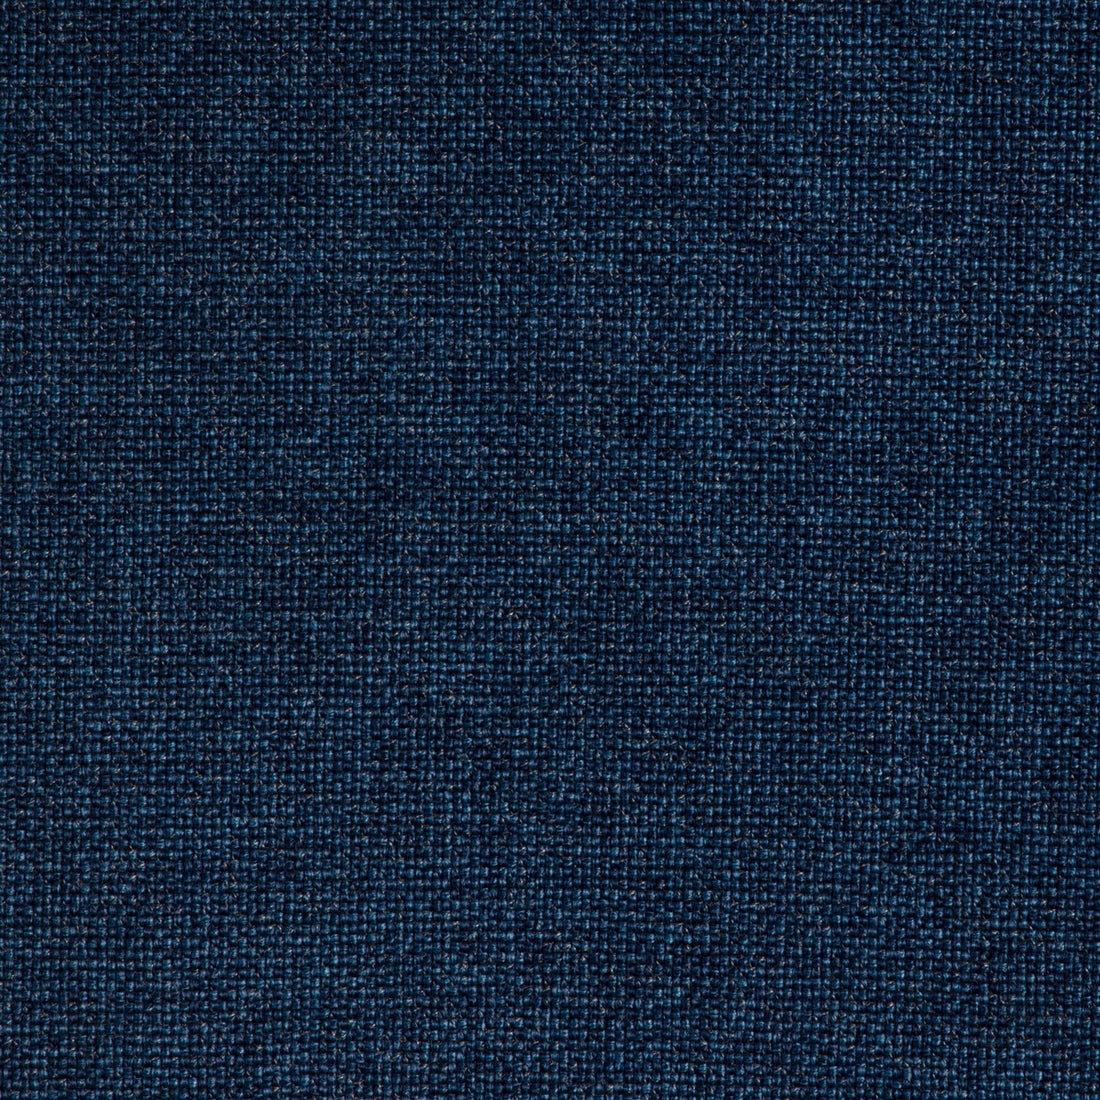 Les Canevas Plain fabric in blue color - pattern 8024114.5.0 - by Brunschwig &amp; Fils in the Les Ensembliers L&